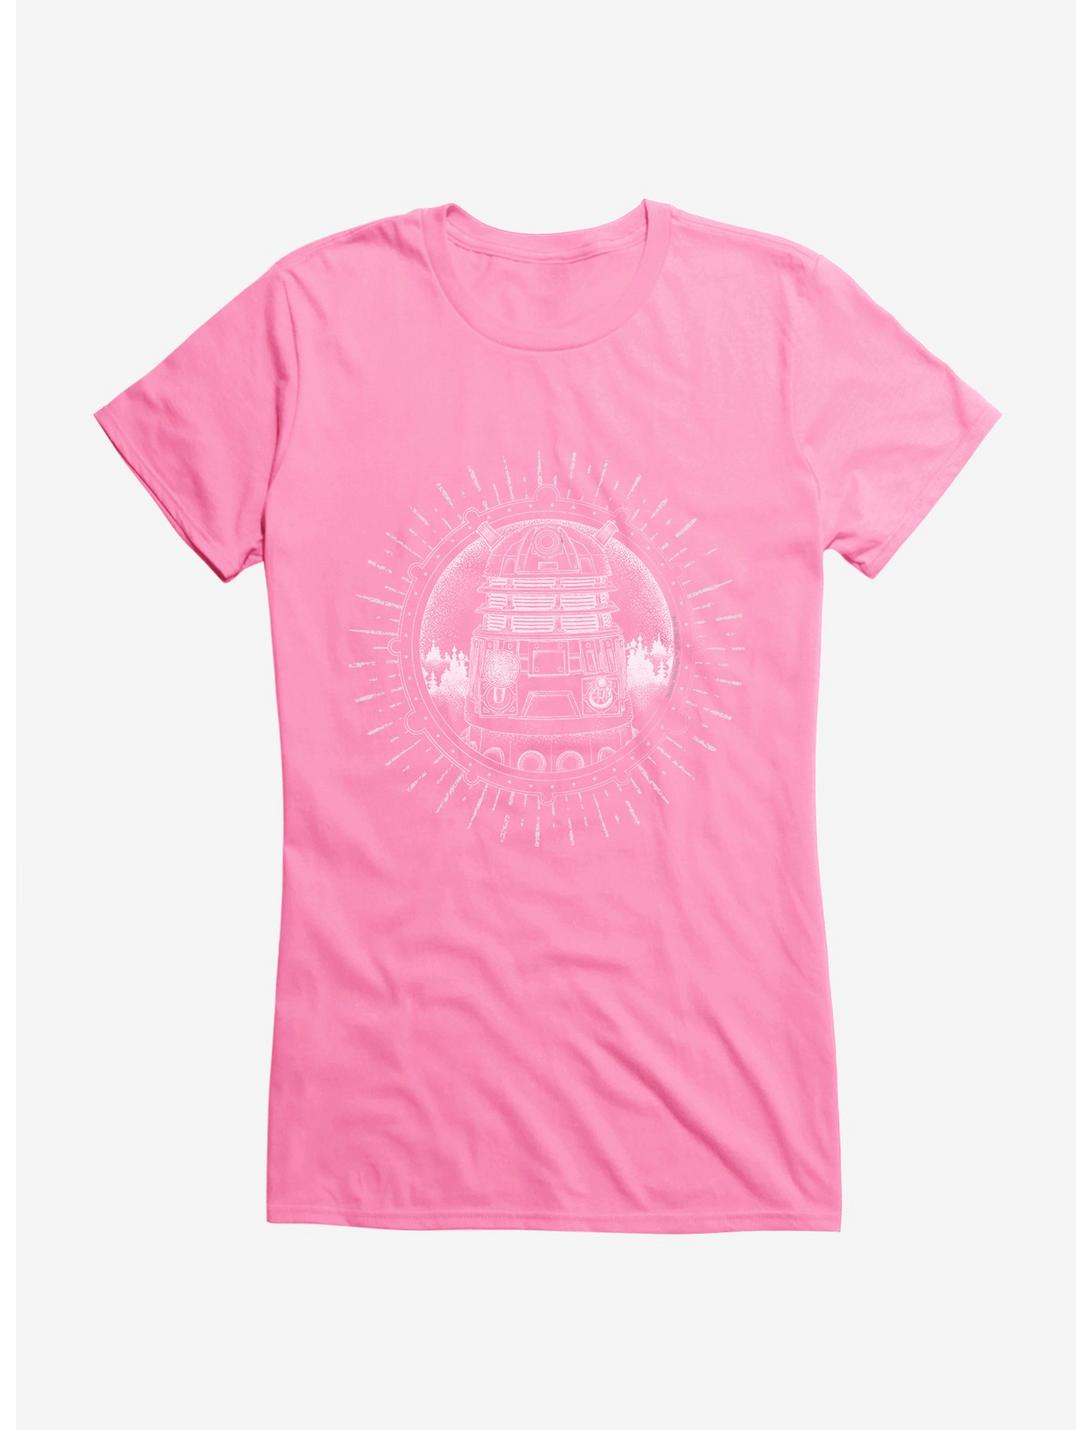 Doctor Who Dalek Pencil Outline Girls T-Shirt | Hot Topic